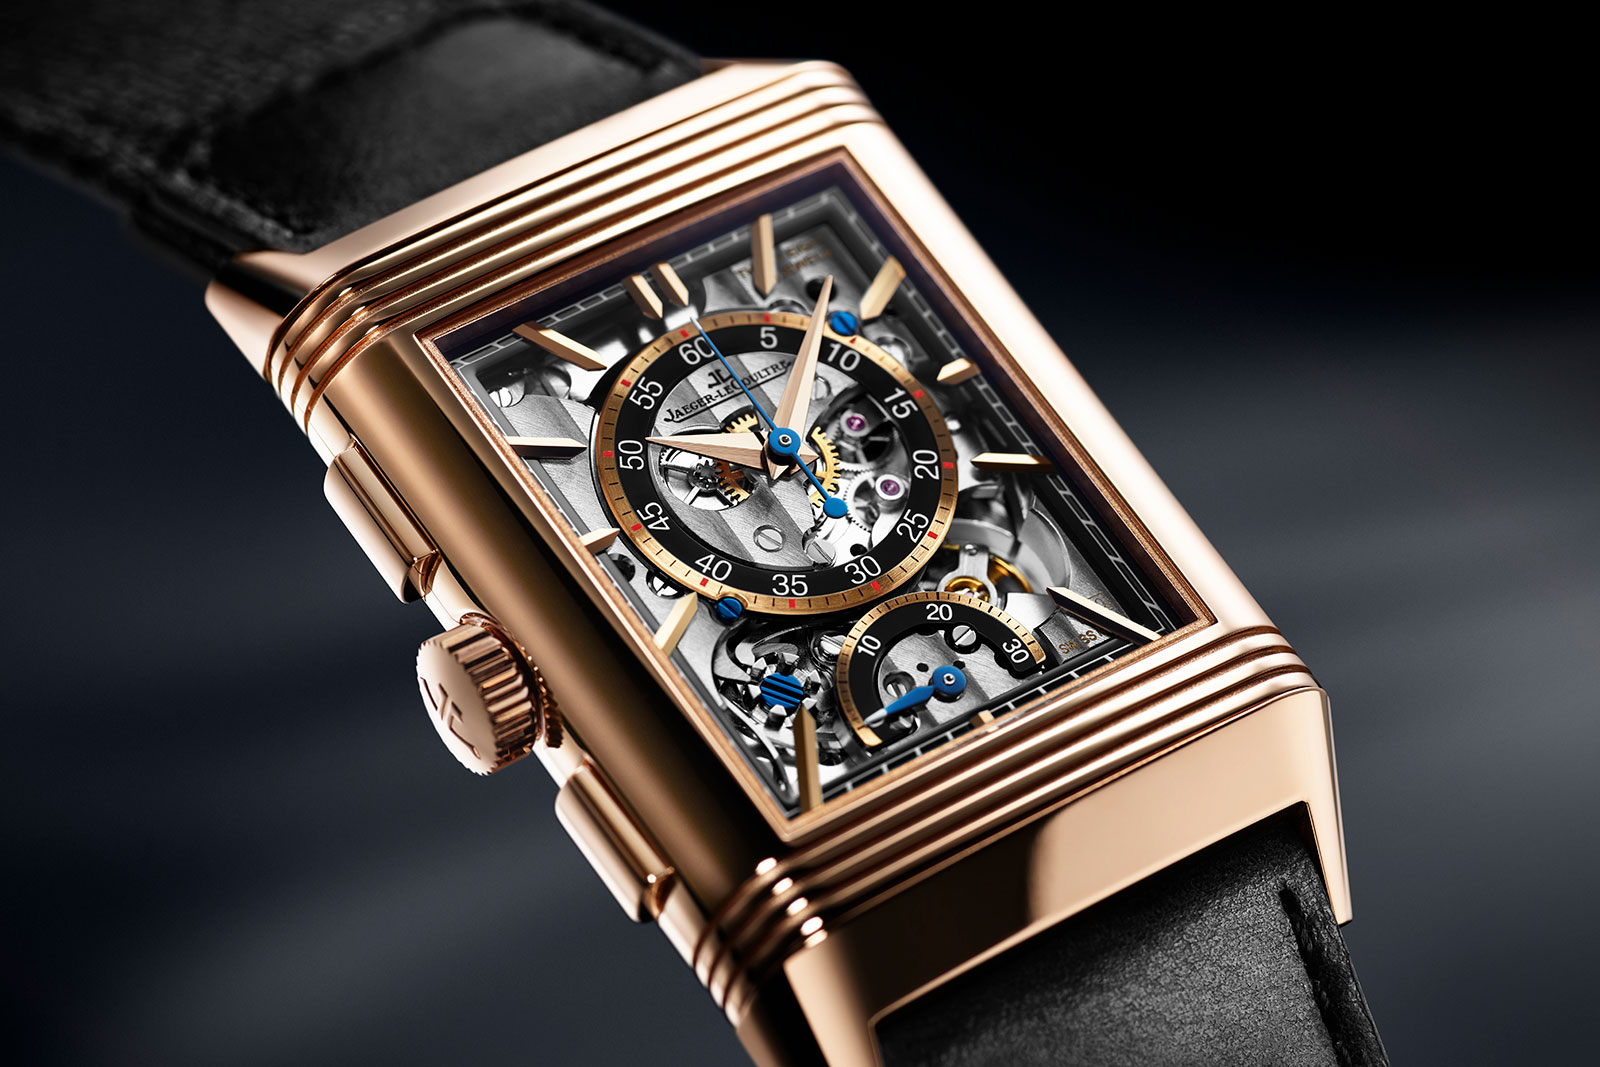 Jaeger-LeCoultre Introduces the Reverso Tribute Chronograph | SJX Watches